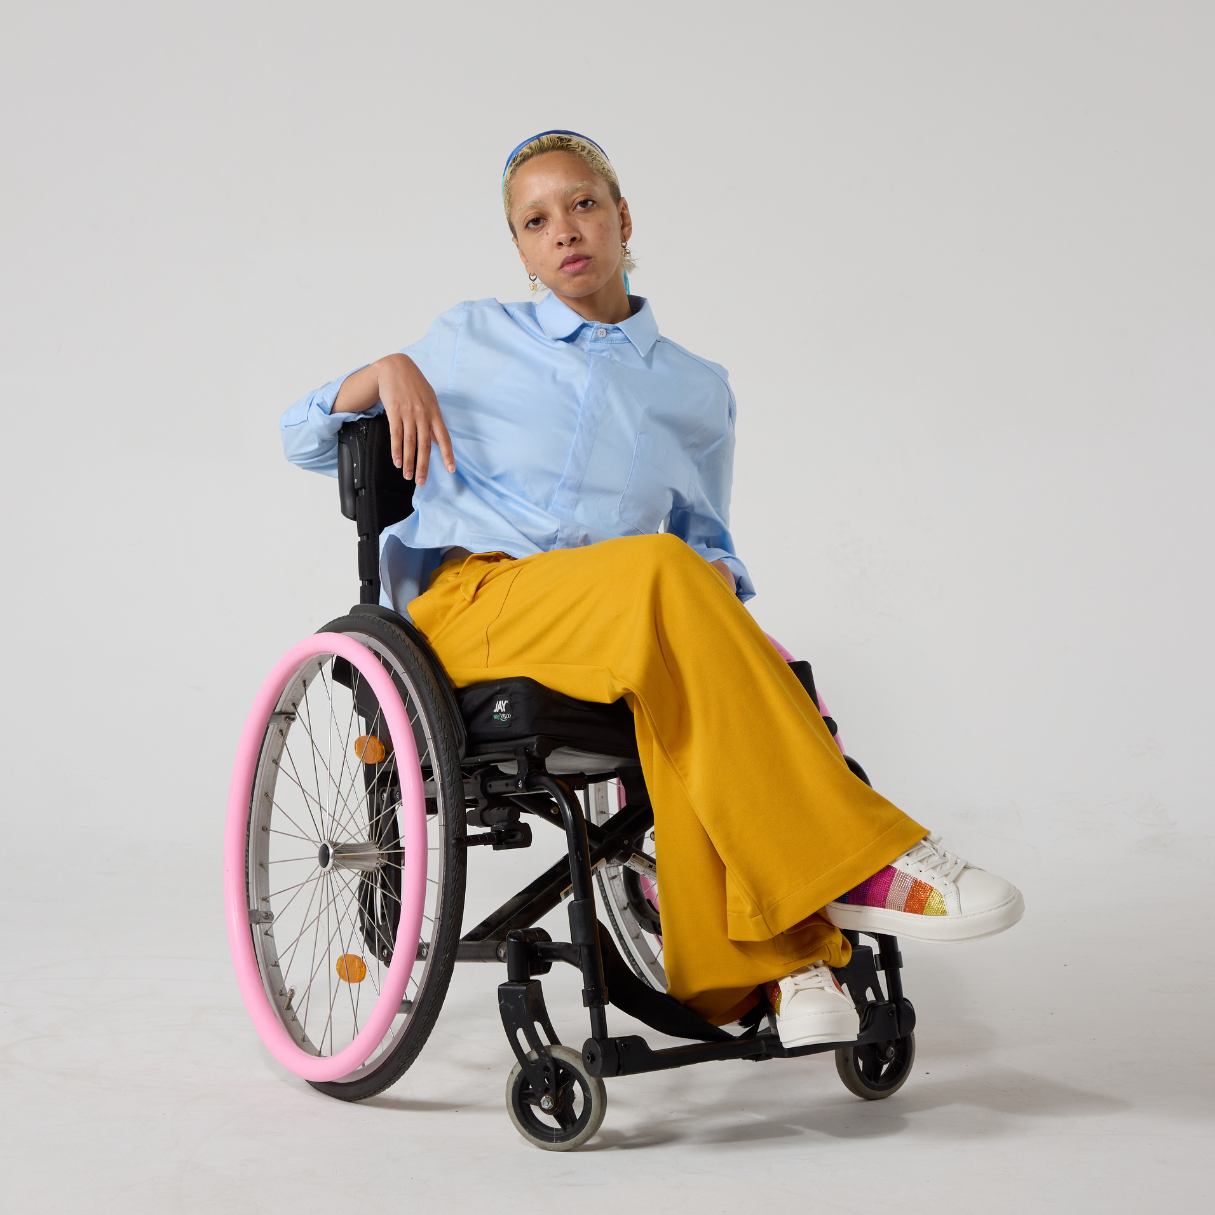 Junior is mixed heritage and has dyed blonde afro hair under a blue silk scarf. They are seated in a wheelchair, wearing a light blue shirt with a collar that has a pocket on the left side as worn. It is cropped at the front. They also have mustard colour jersey culottes on with white sneakers that have sparkly rainbow accents. Set against an off white back ground.